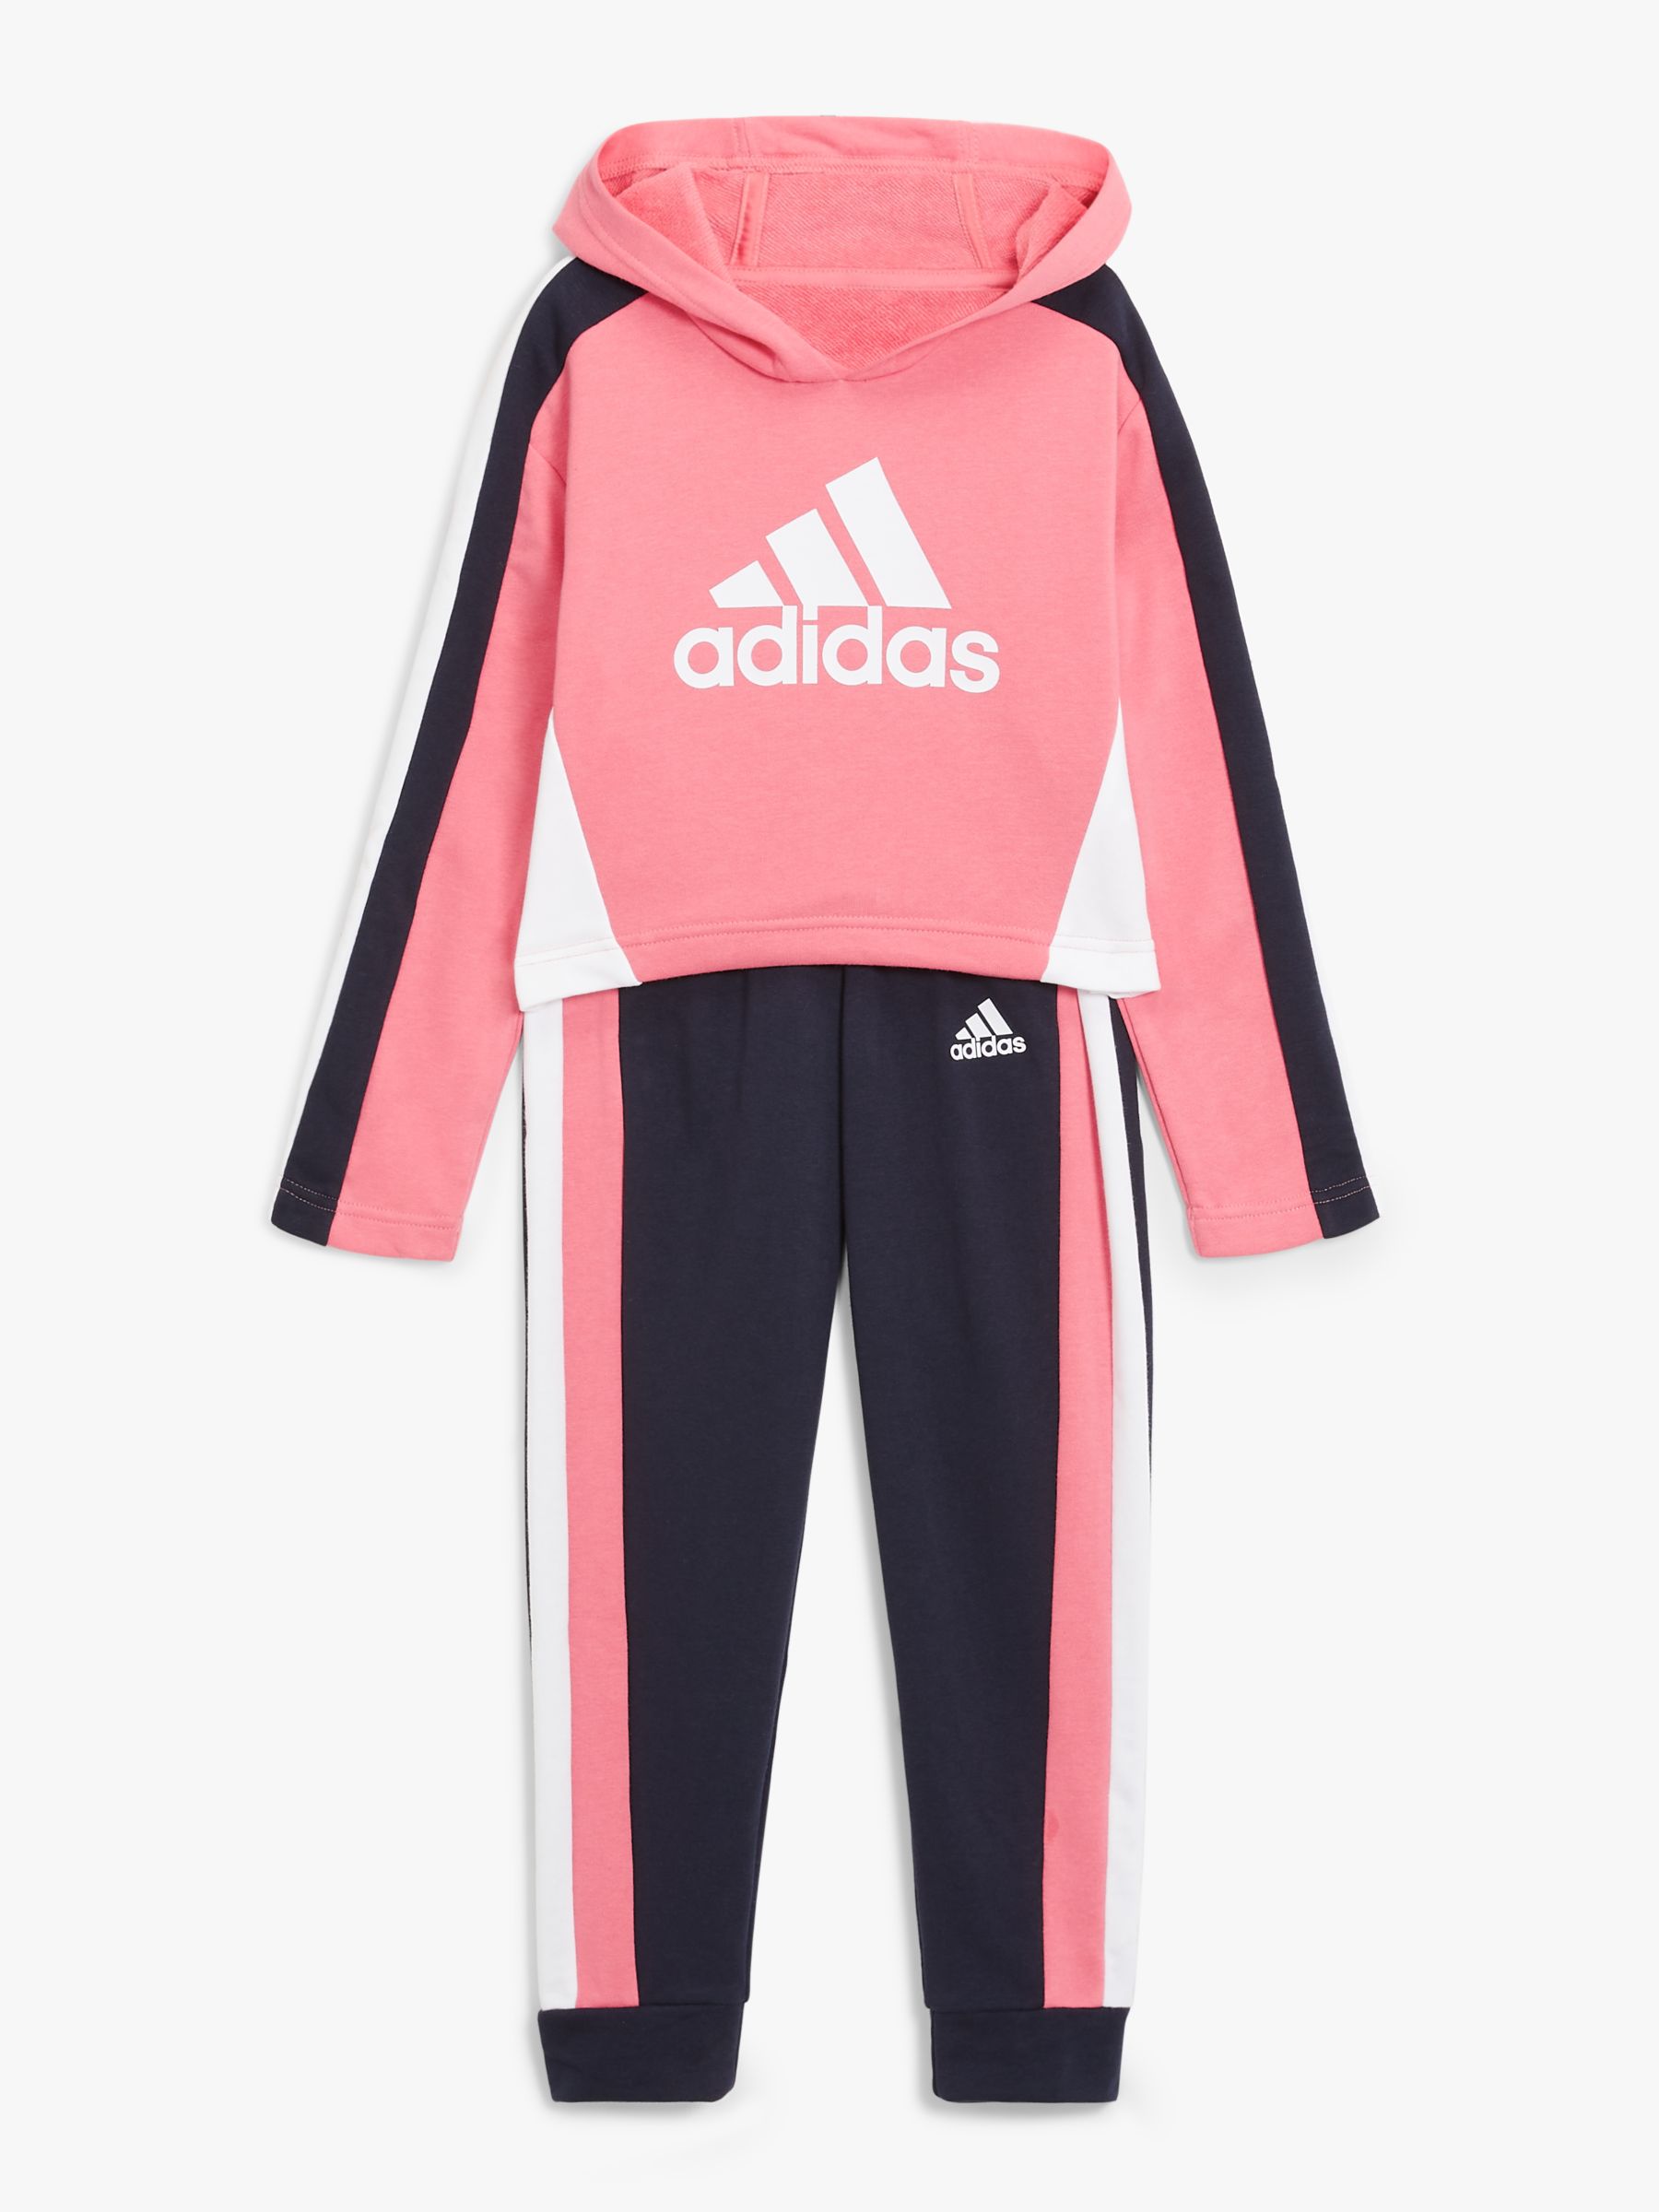 Adidas Childrens Hooded Cropped Tracksuit Pink At John Lewis And Partners